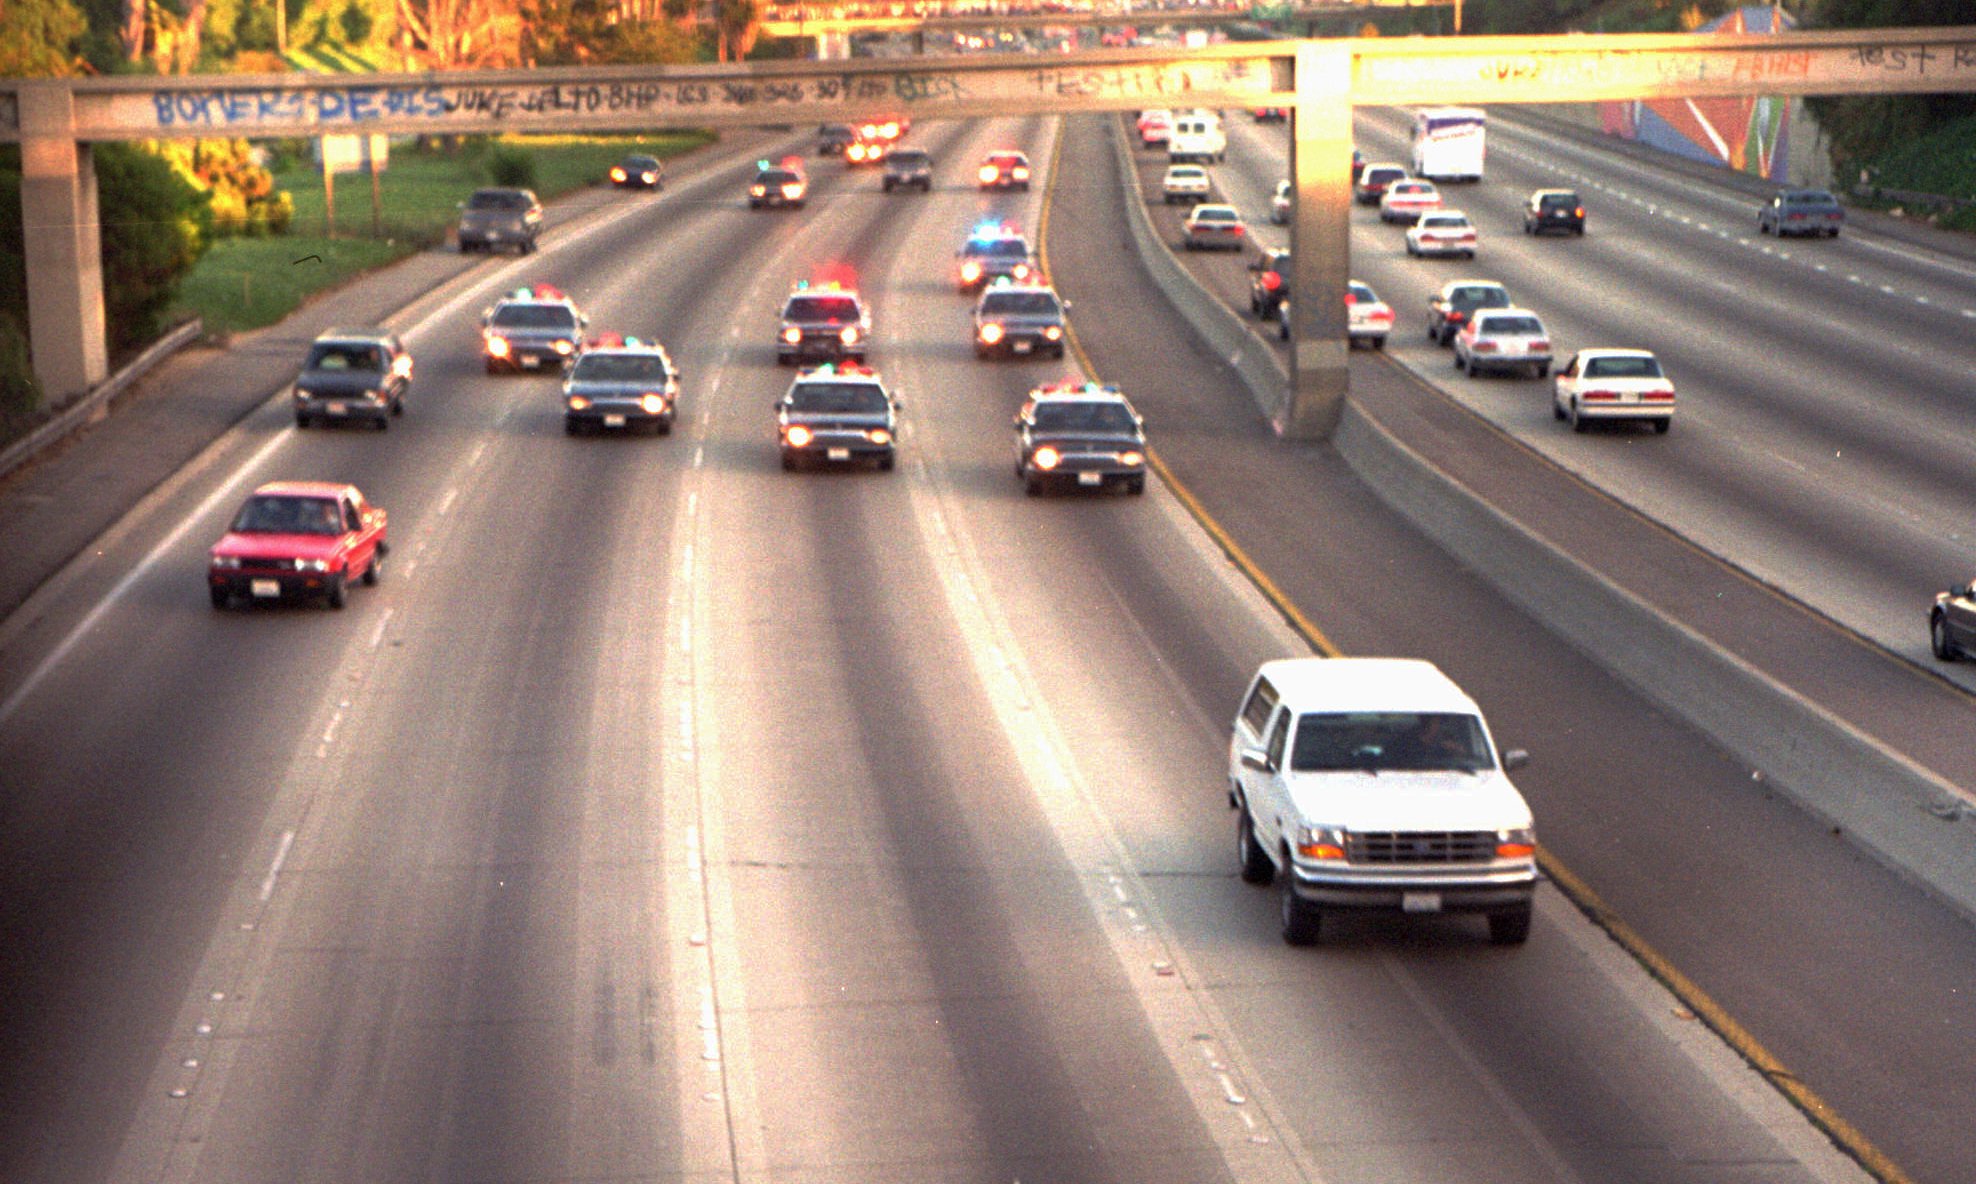 A white Ford Bronco, driven by Al Cowlings and carrying O.J. Simpson, is trailed by police cars as it travels on a southern California freeway on June 17, 1994, in Los Angeles. (Joseph Villarin—AP)